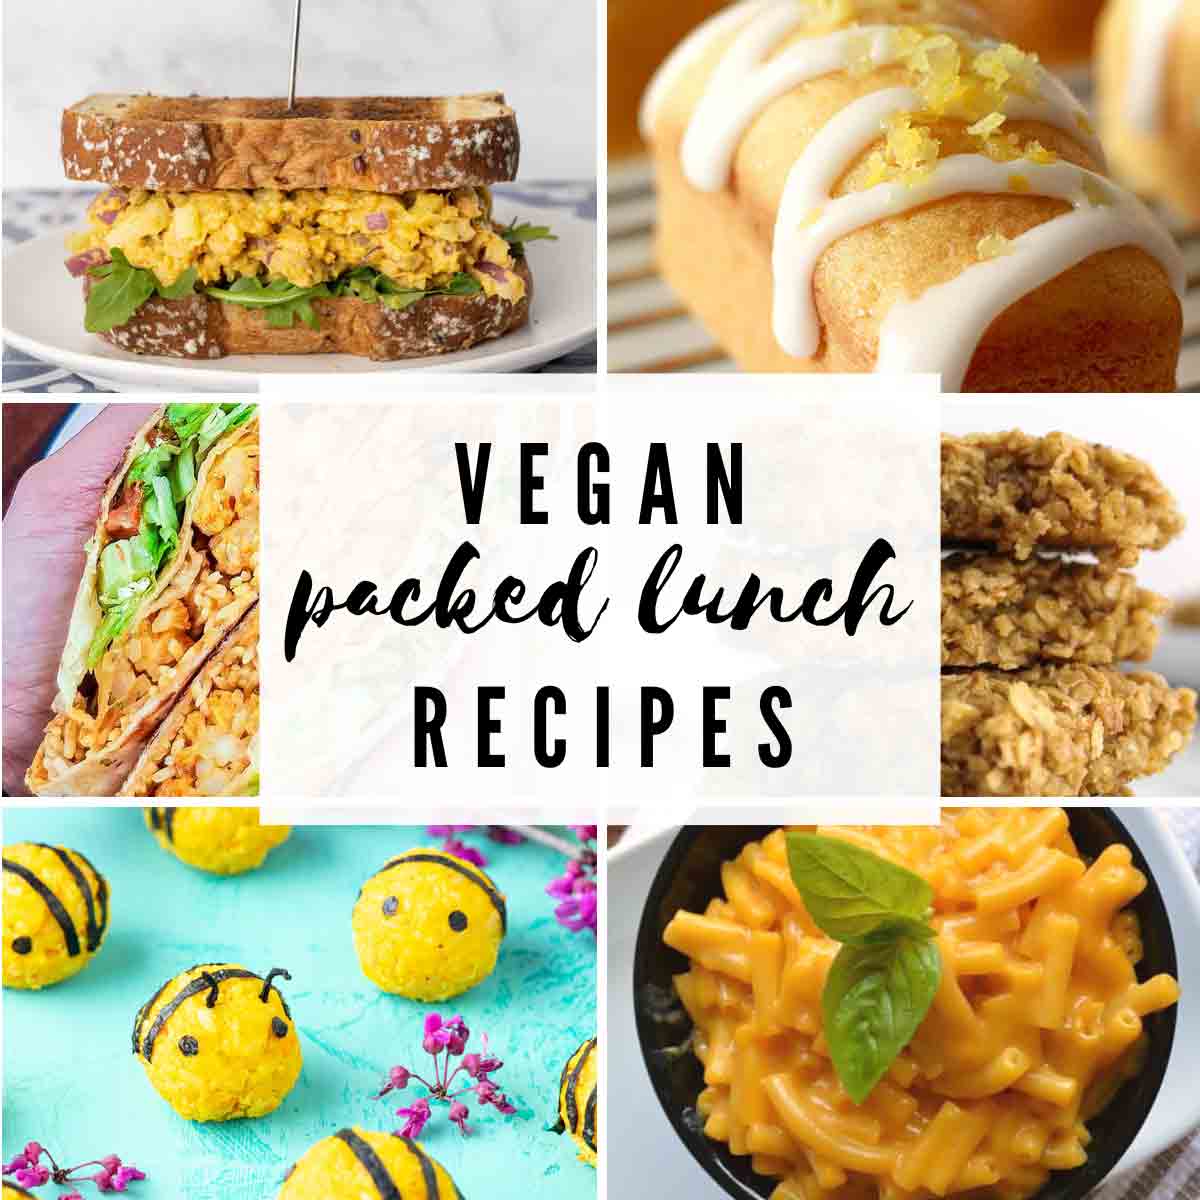 Image Collage Of 6 Vegan Packed Lunch Recipes With Text Overlay